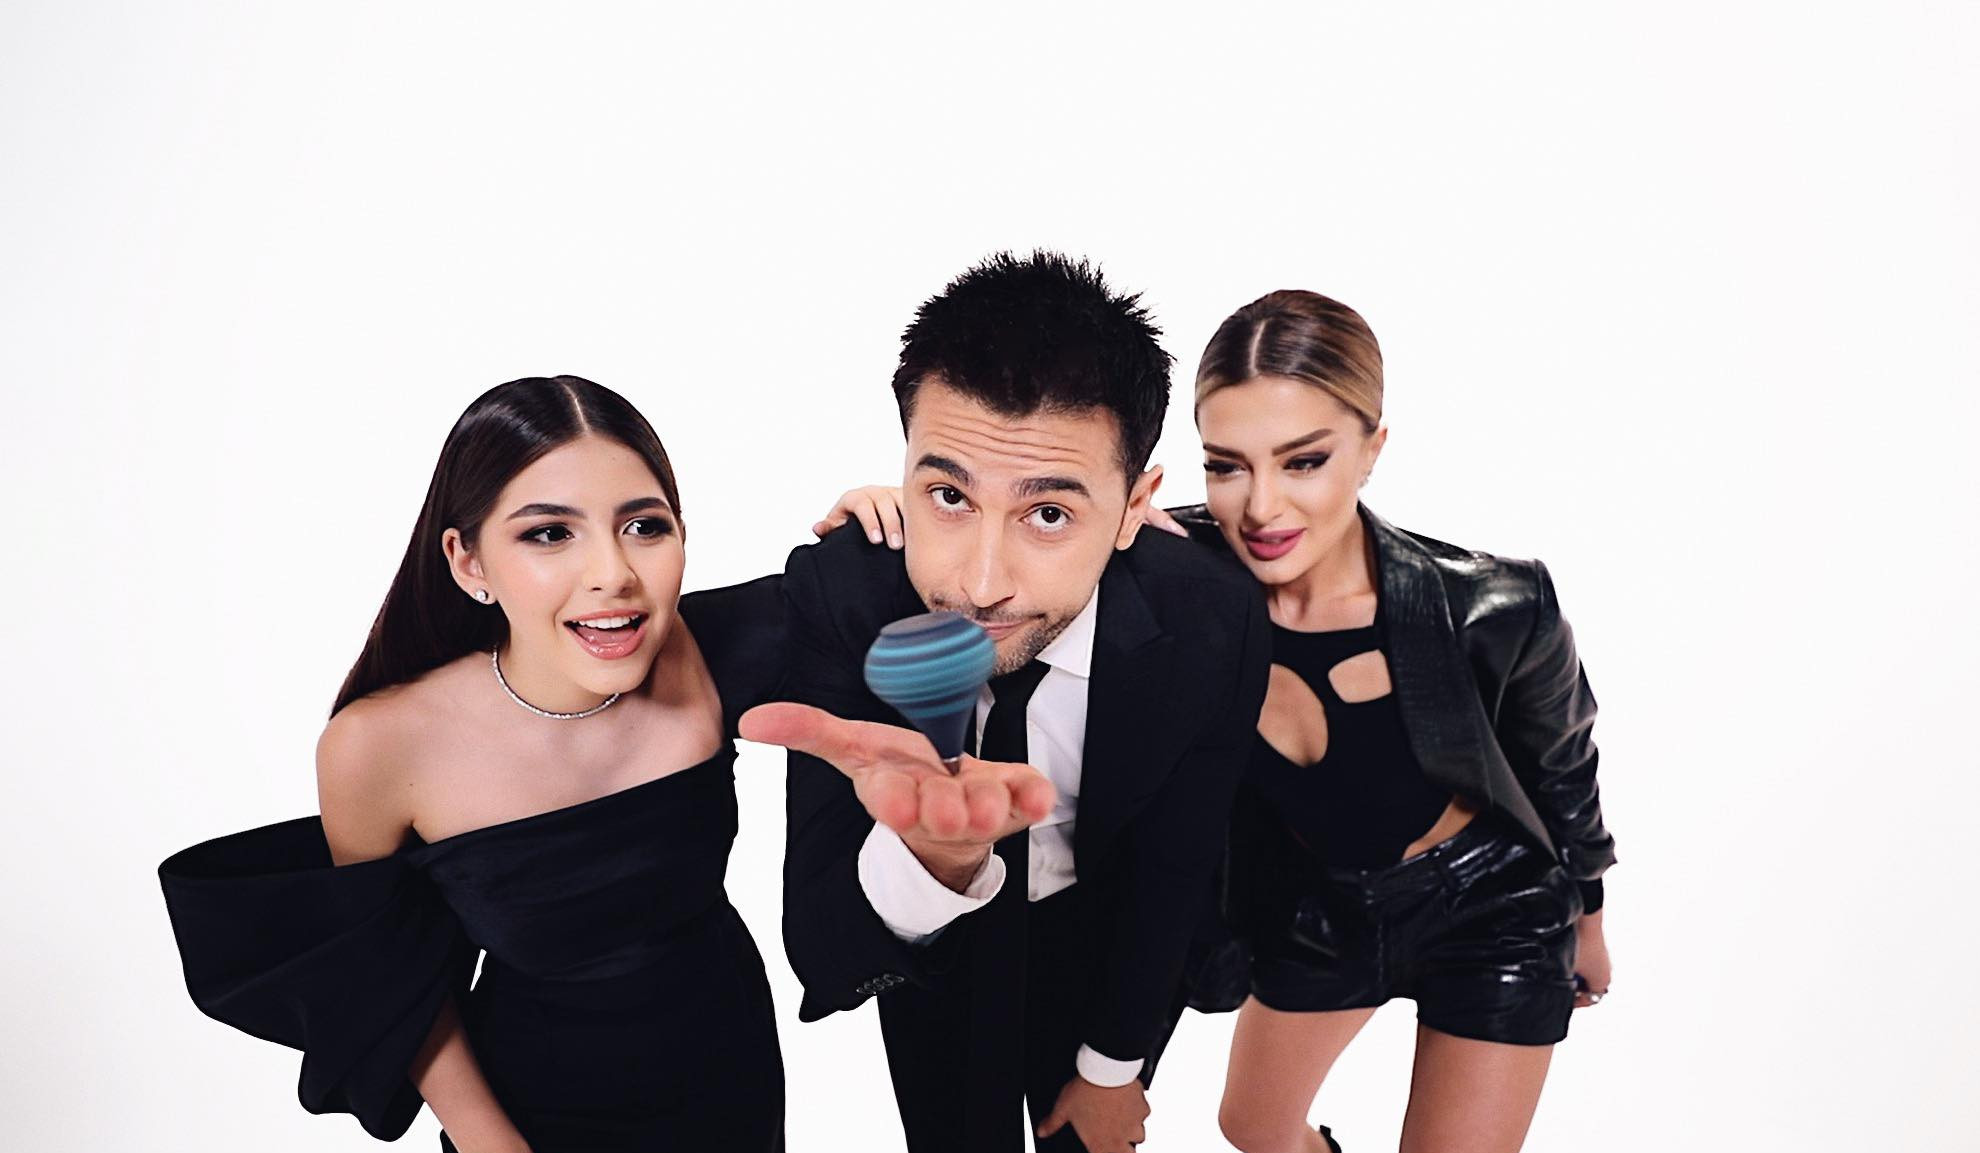 First channel presents hosts of Junior Eurovision